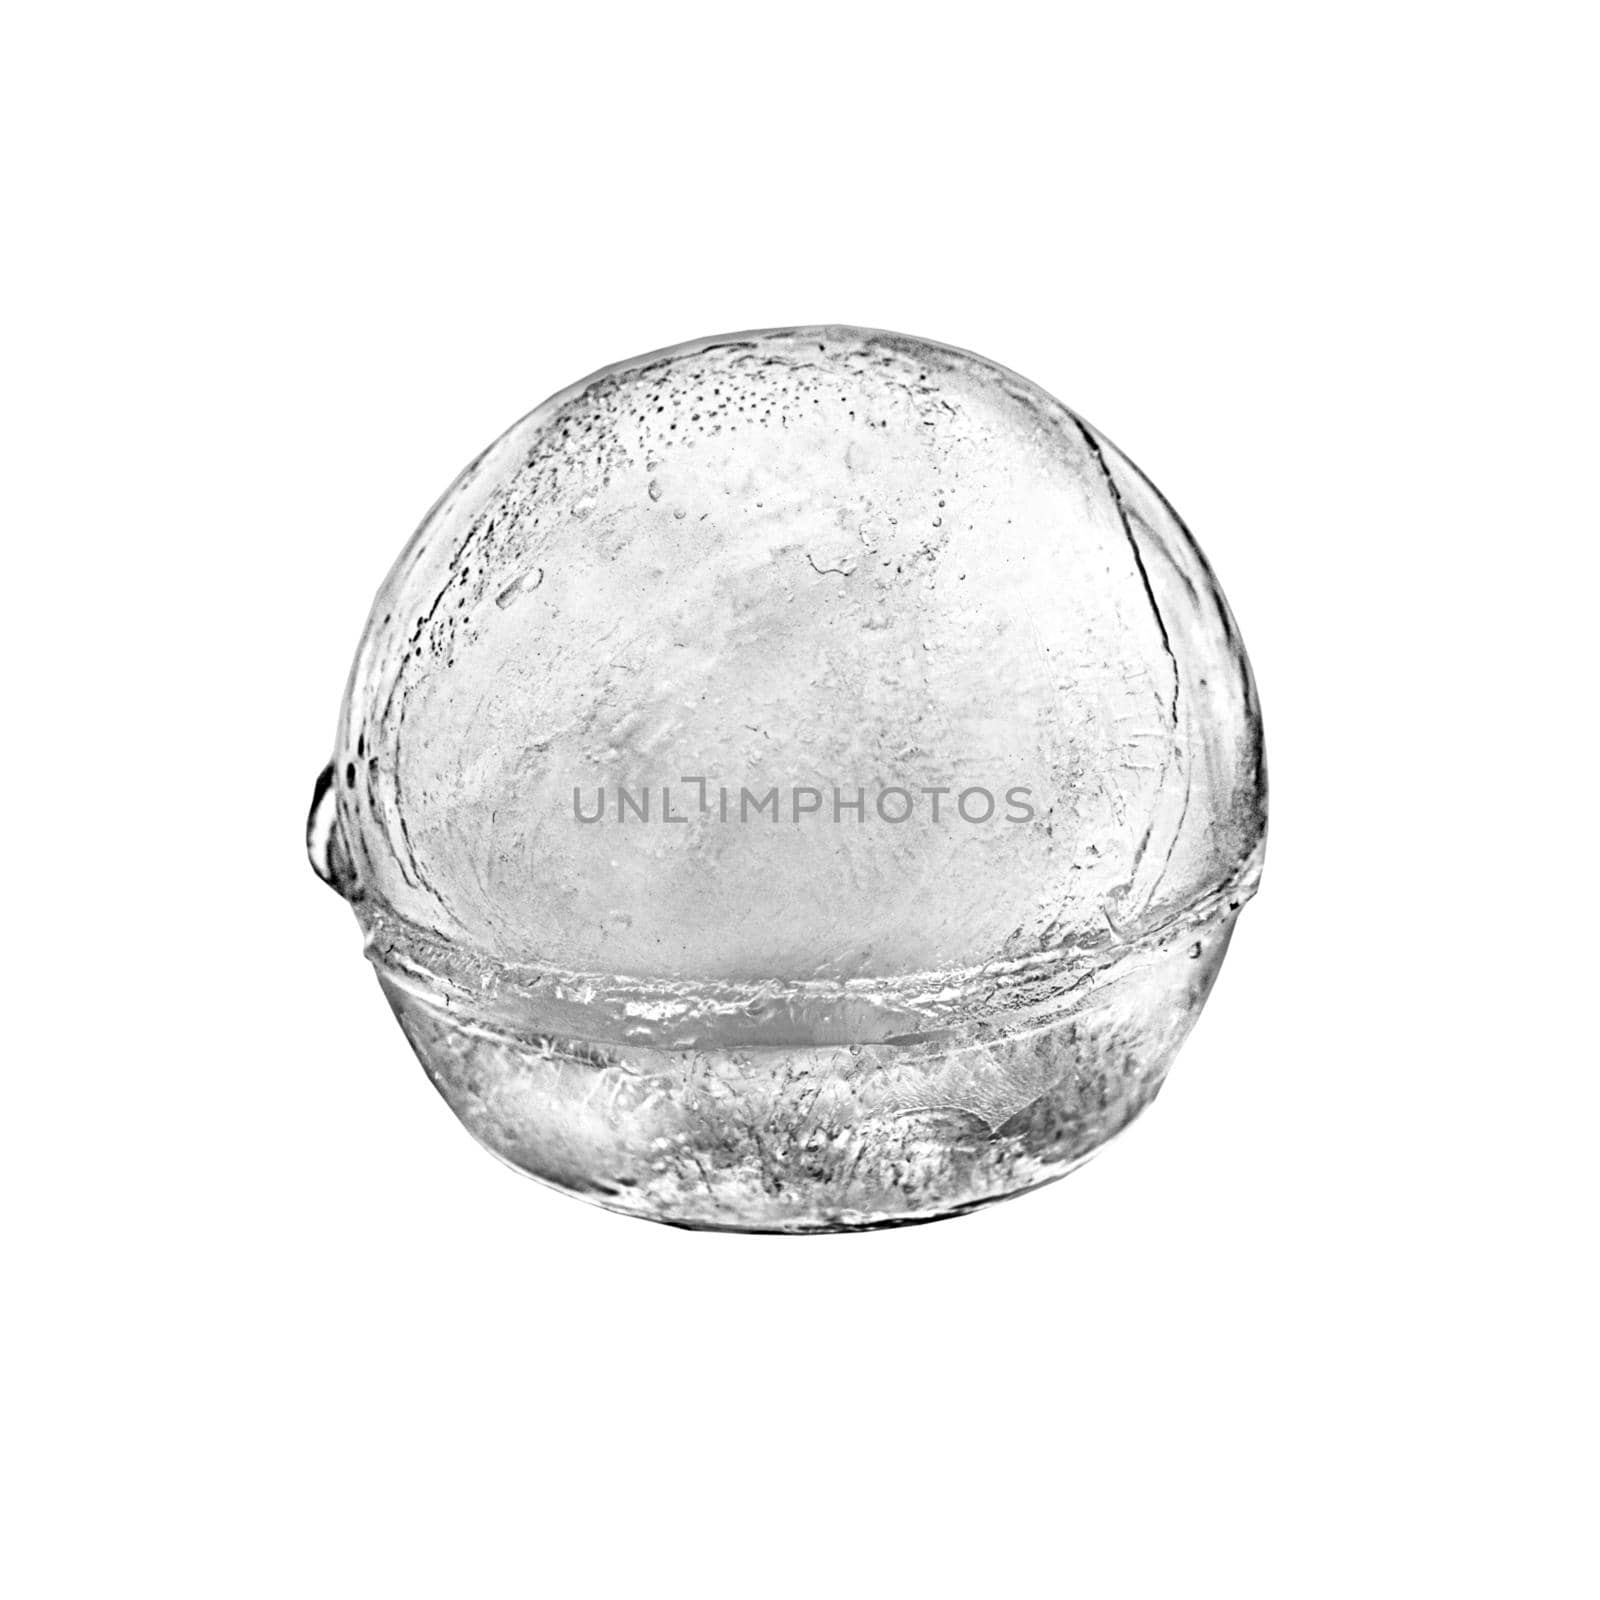 Clear round ice ball on a white background